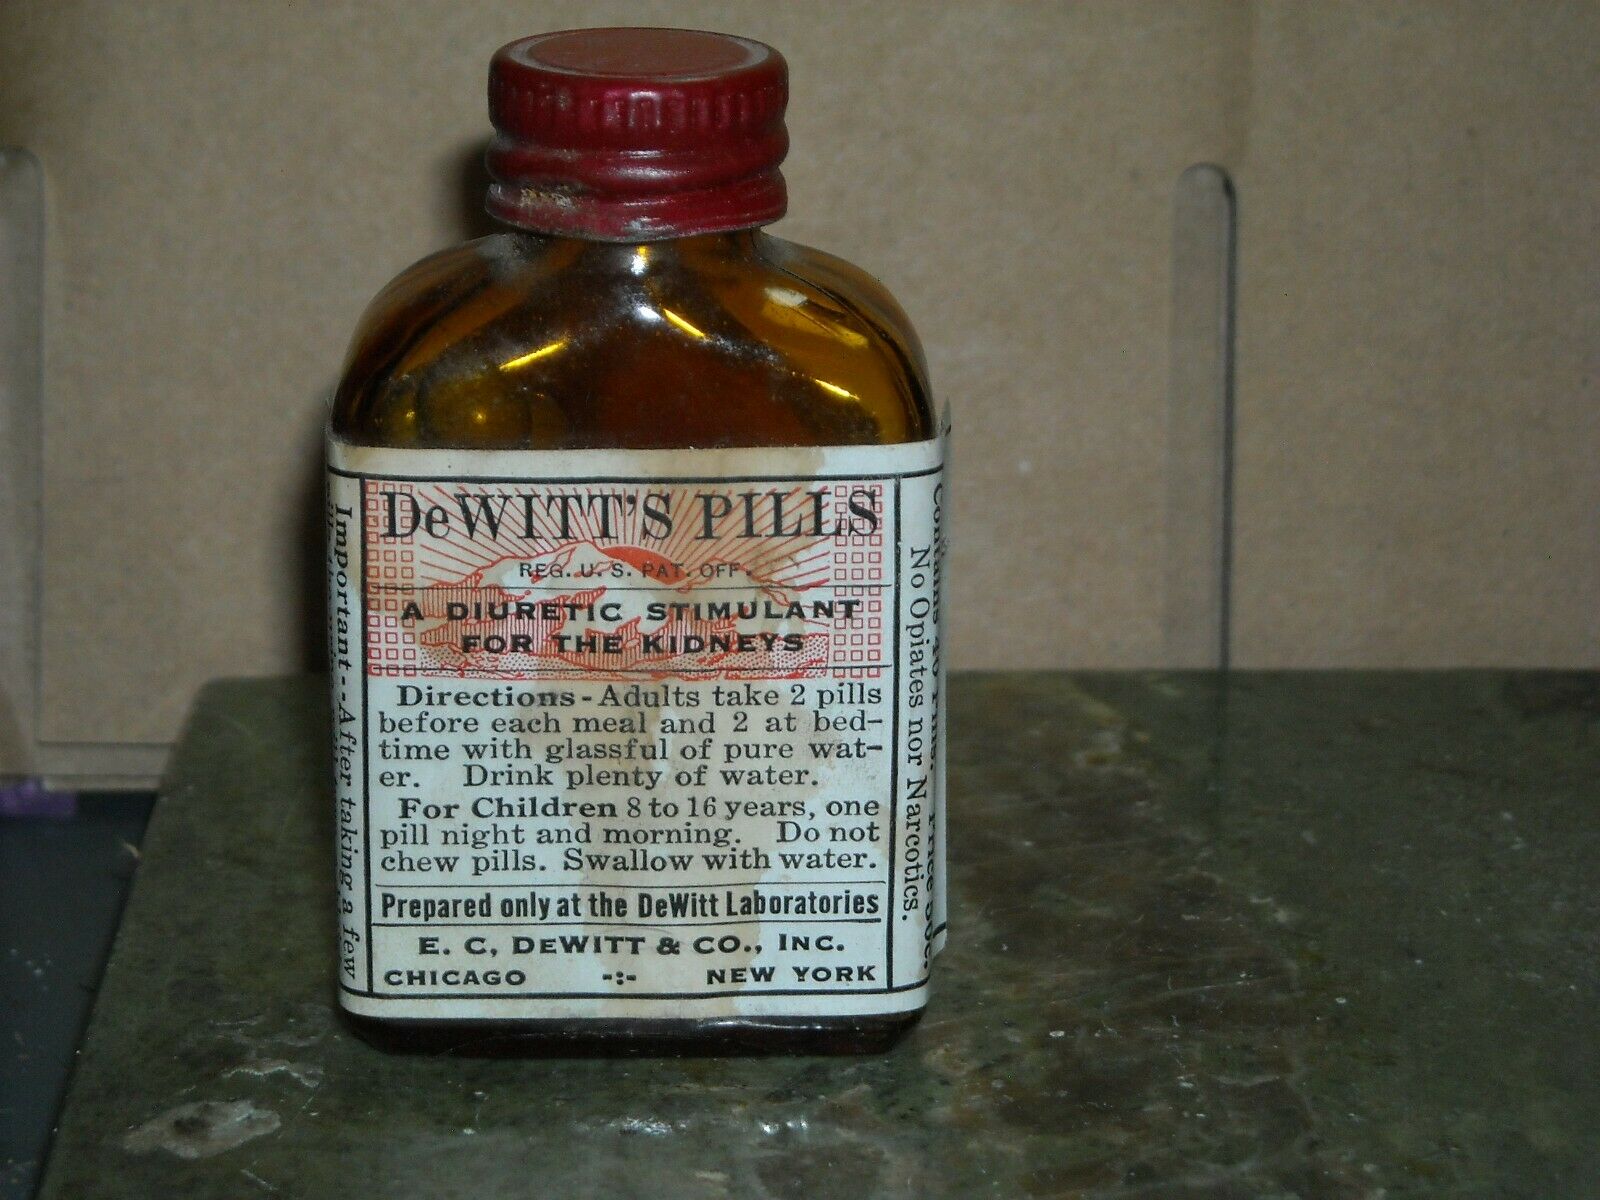 Vintage Bottle W Contents Dewitts Pills Diuretic Stimulant For The Kidneys 2.5"b